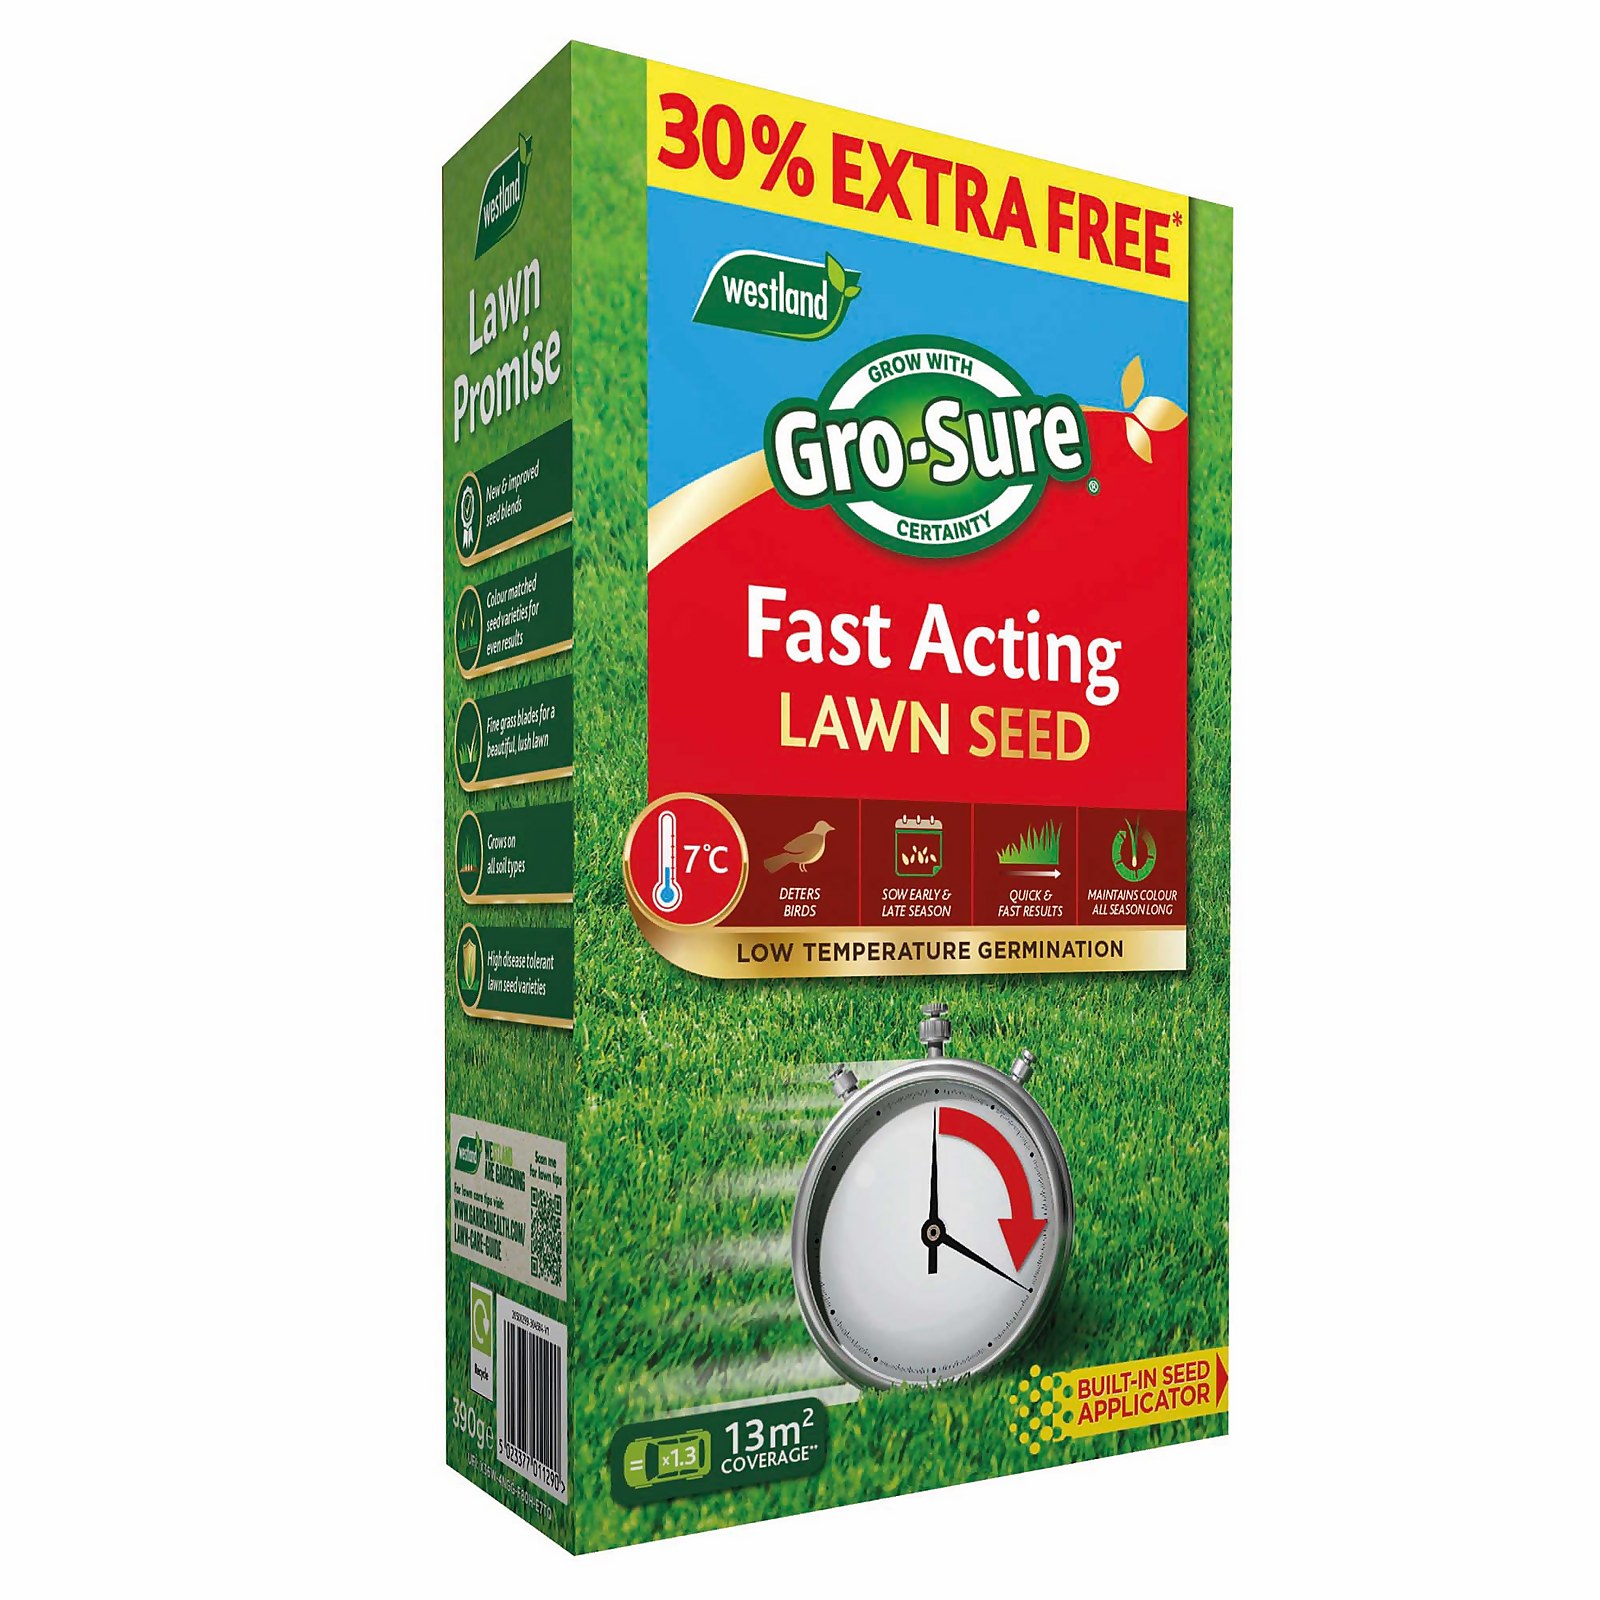 Photo of Gro-sure Fast Acting Lawn Seed - 10m² +30 Extra Free